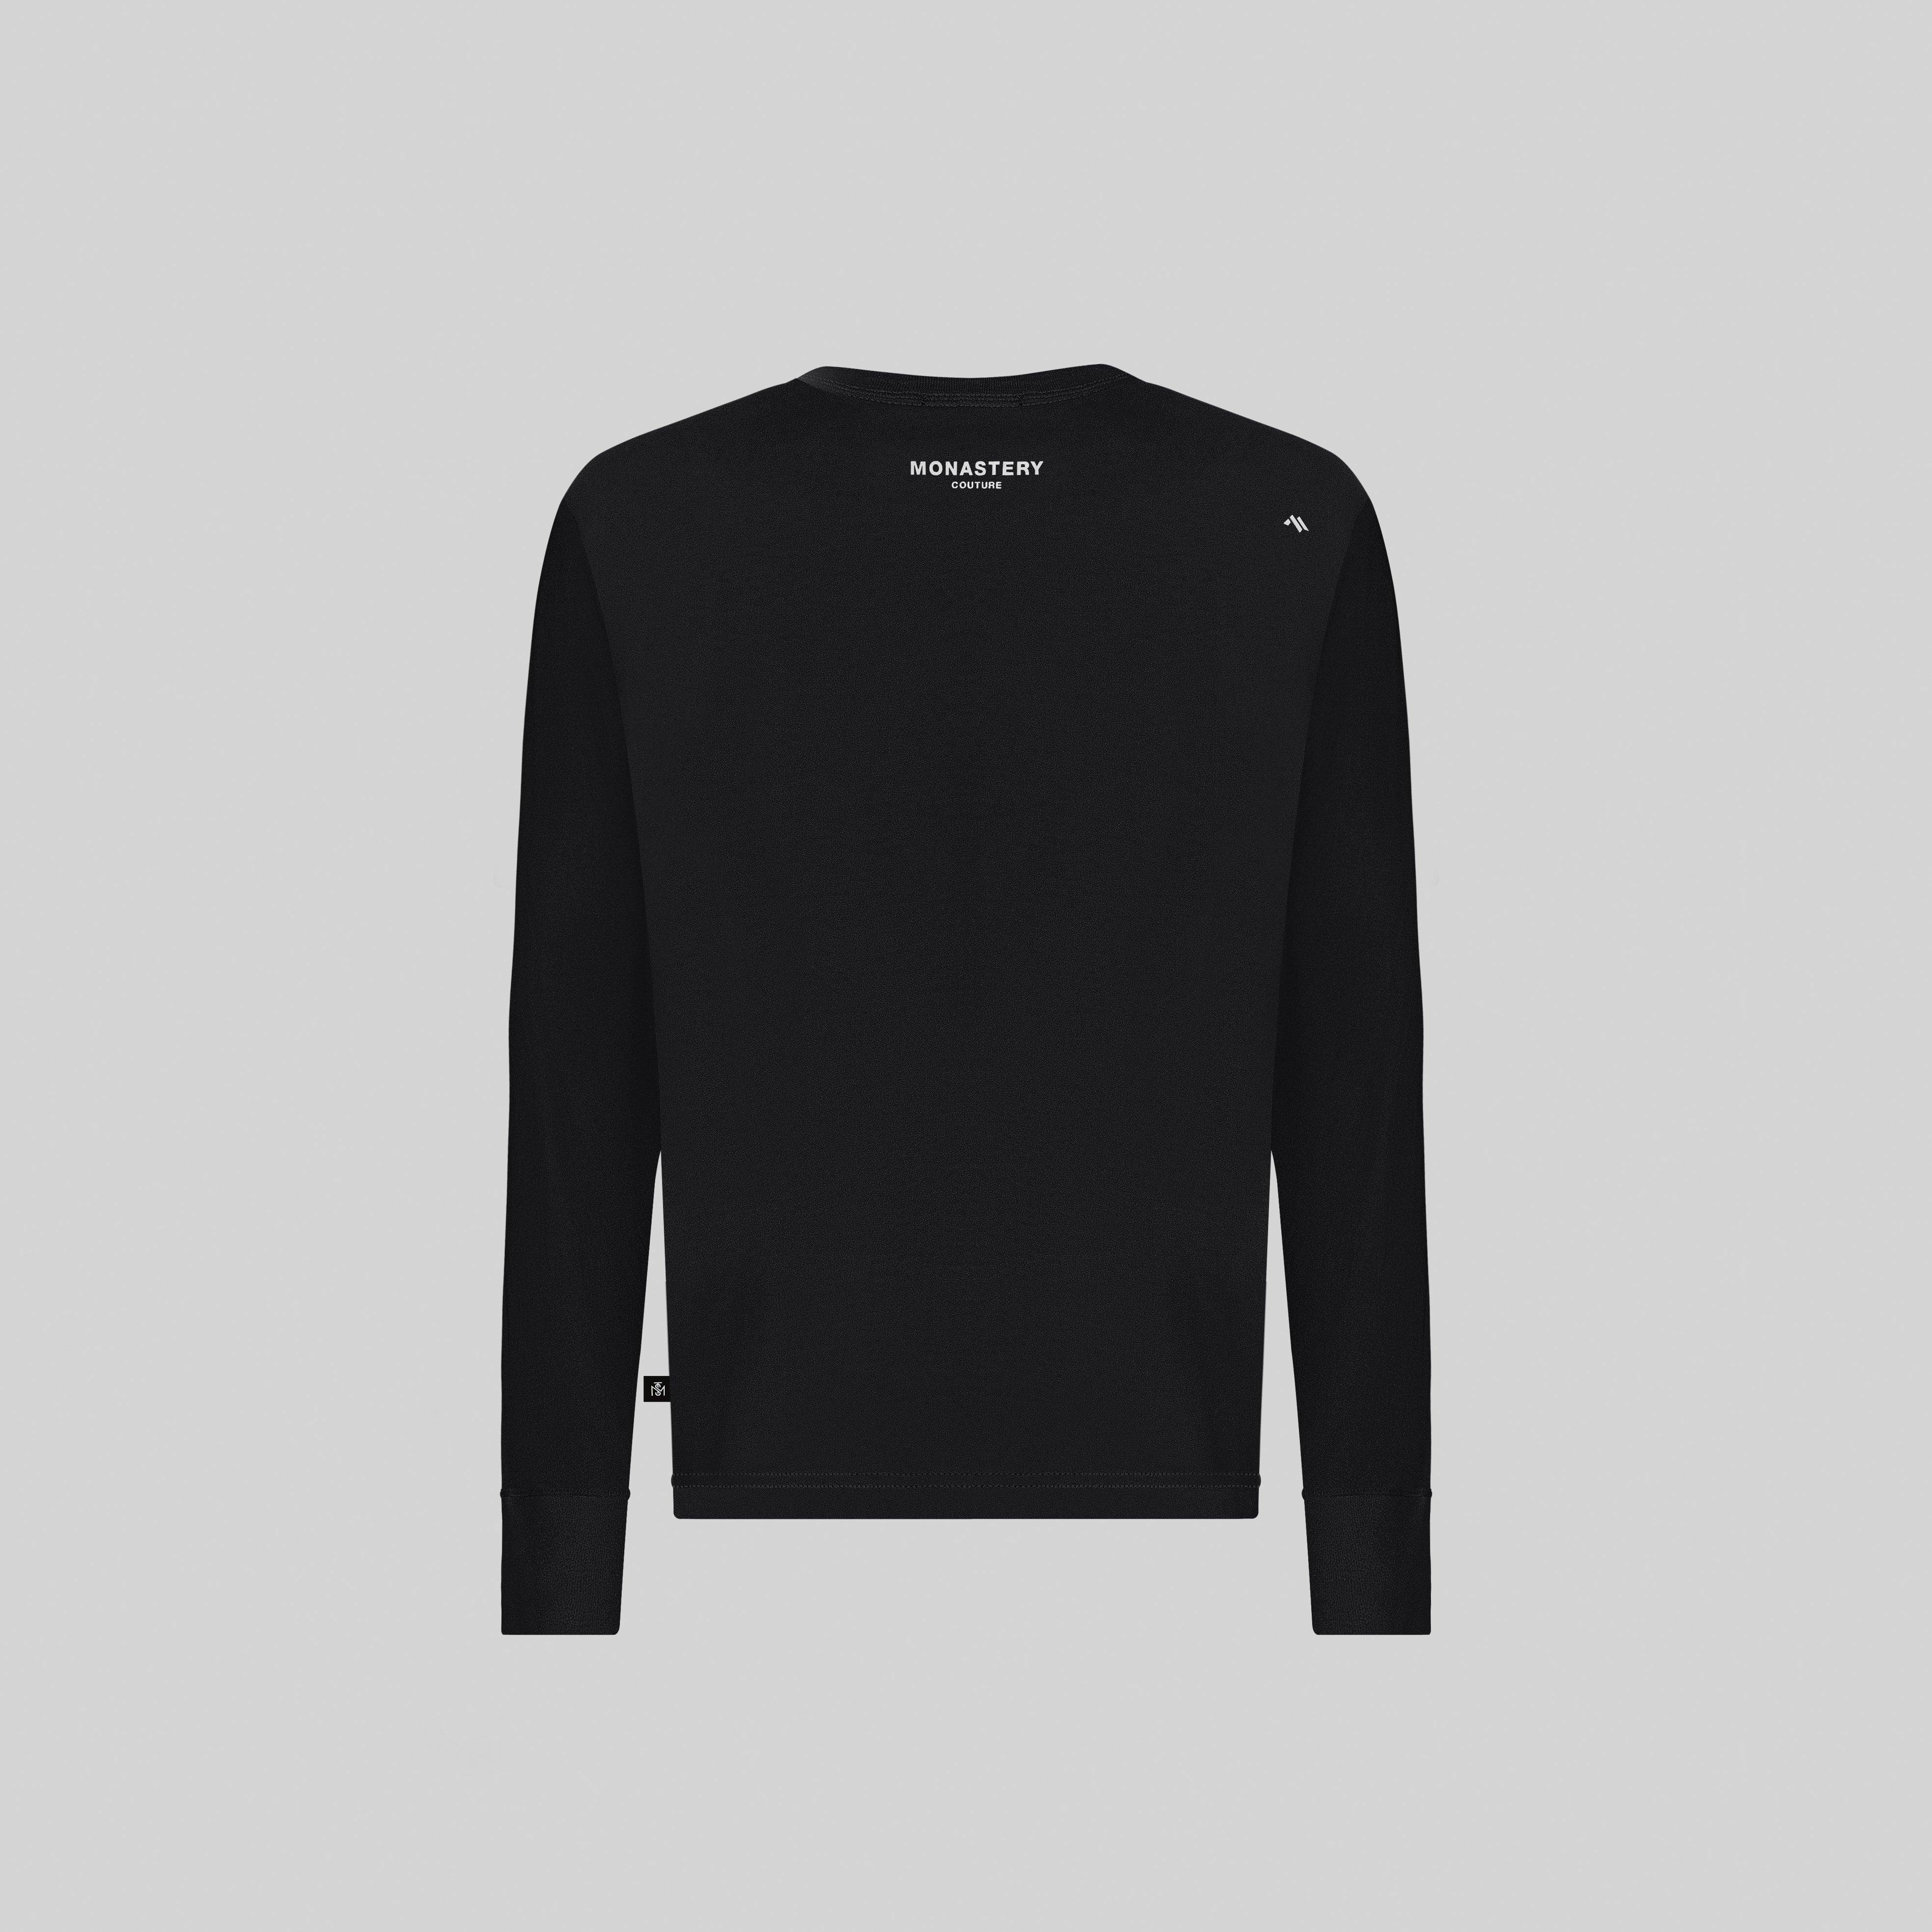 CERES BLACK LONG SLEEVE | Monastery Couture